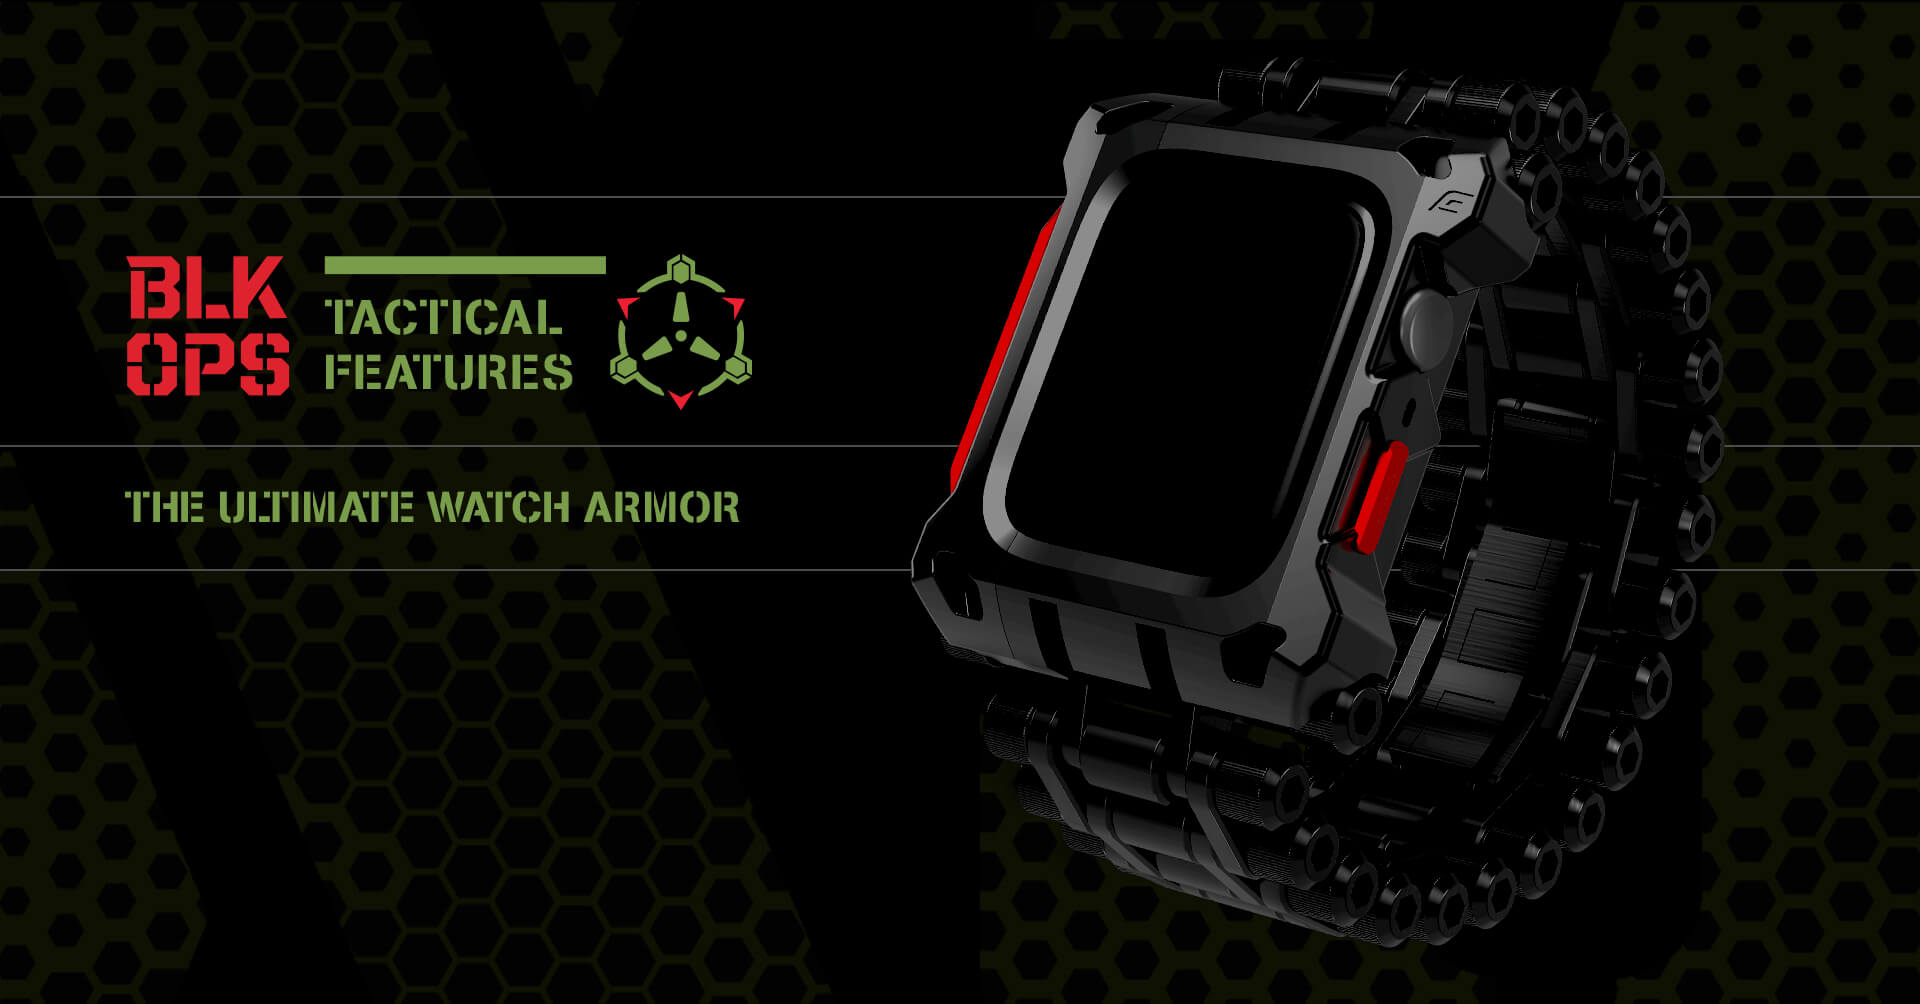 Black Ops Tactical Features — The Ultimate Watch Armor